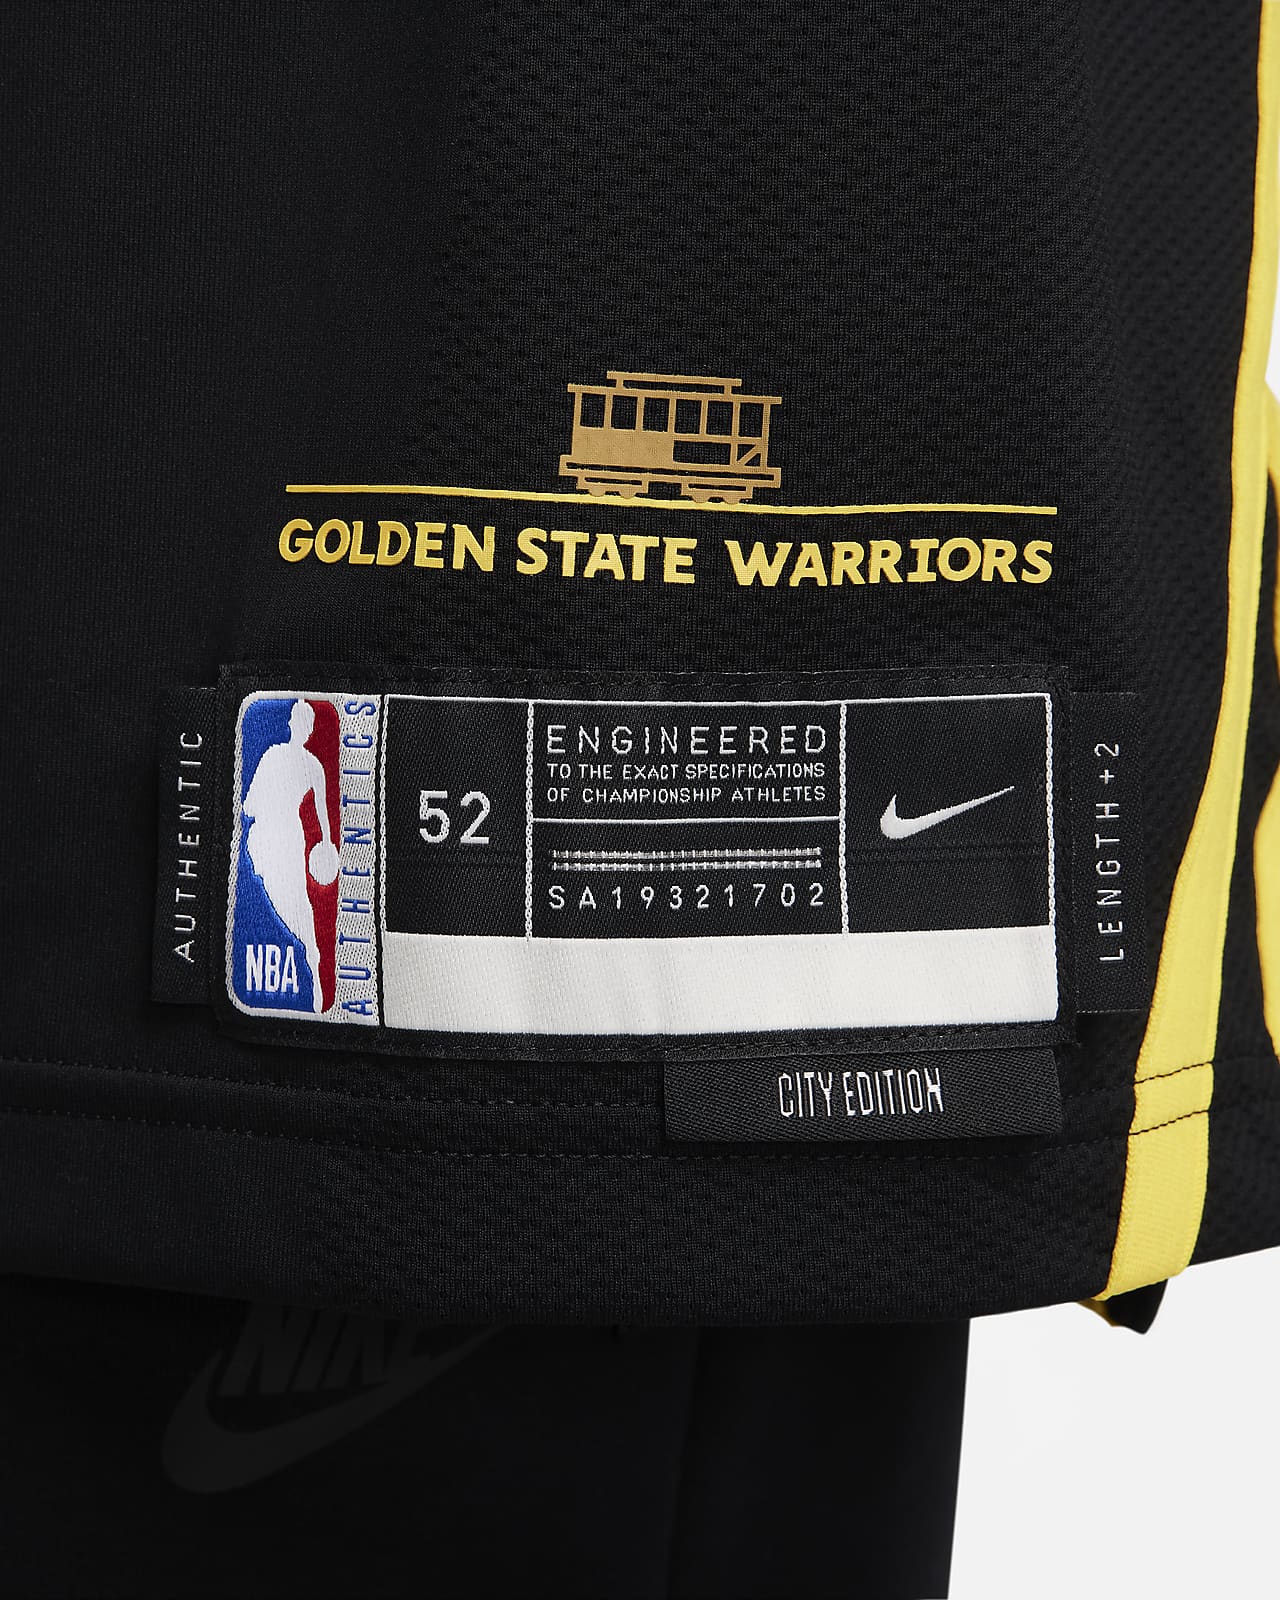 Nike Performance NBA STEPHEN CURRY GOLDEN STATE WARRIOS CE JERSEY